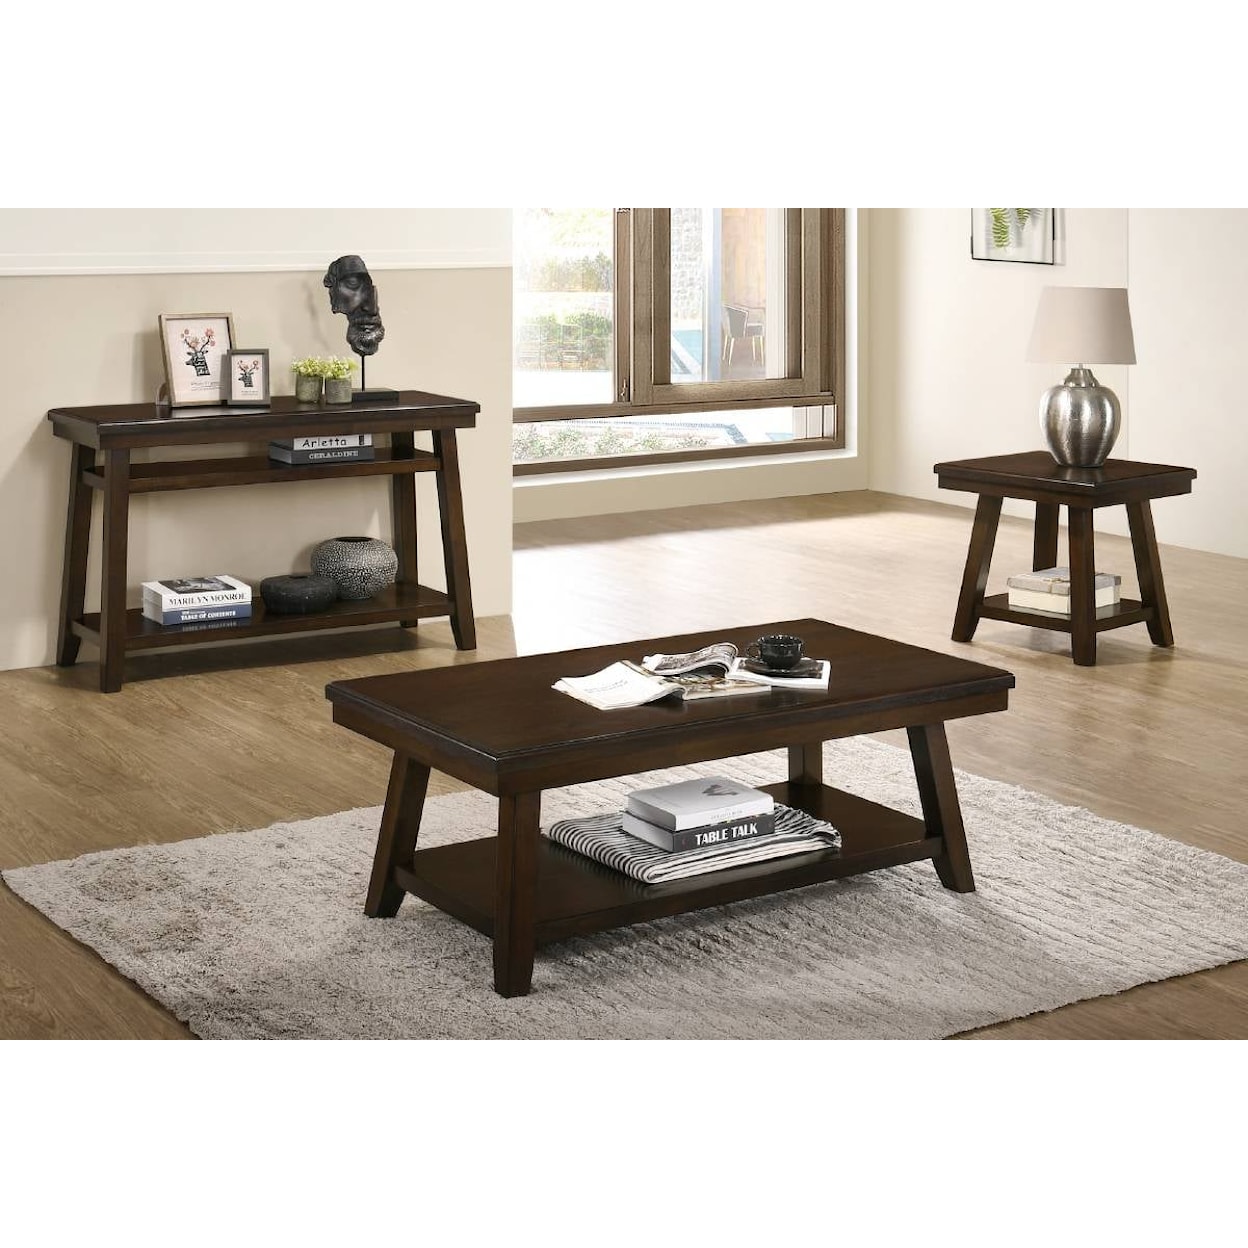 Poundex Occasional Tables HODGE BROWN SOFA TABLE |